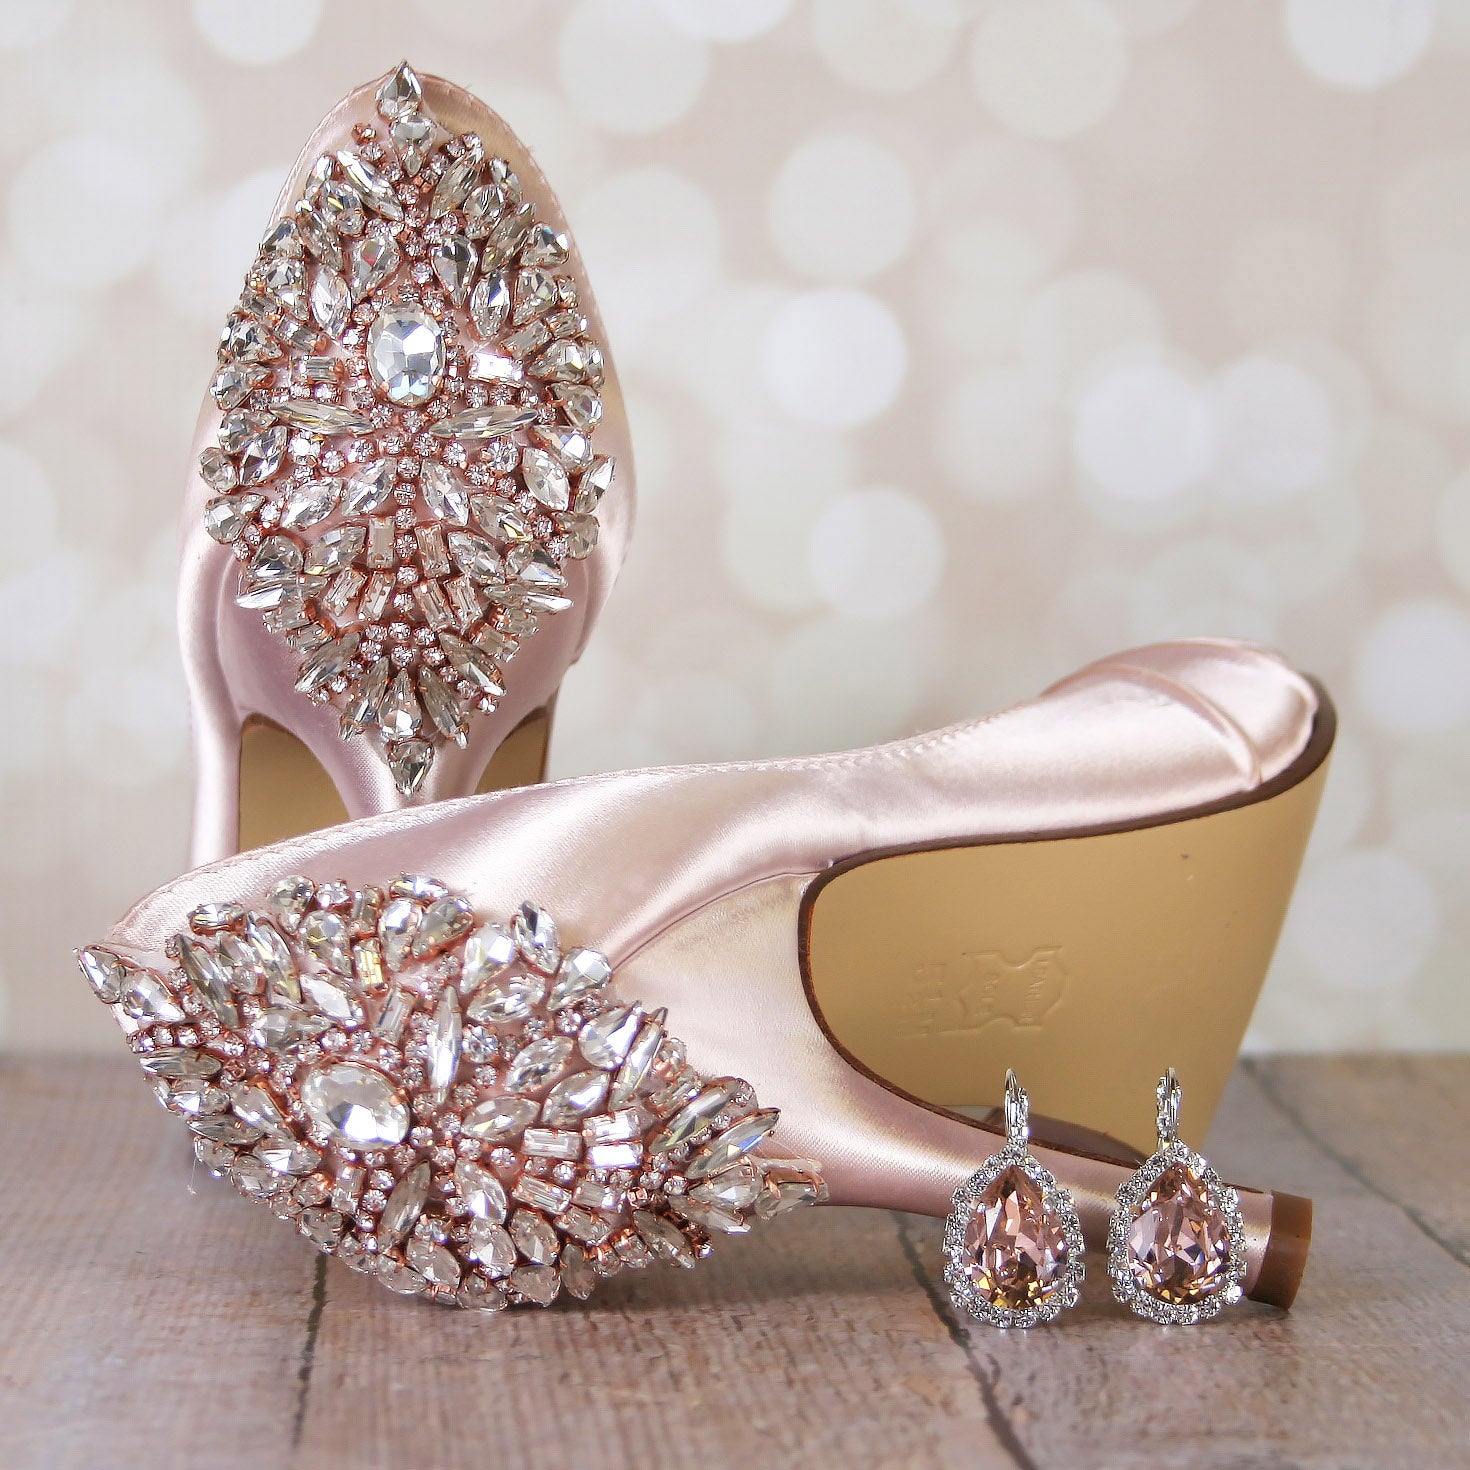 Looking For Your Wedding Day Custom Wedding Shoes?